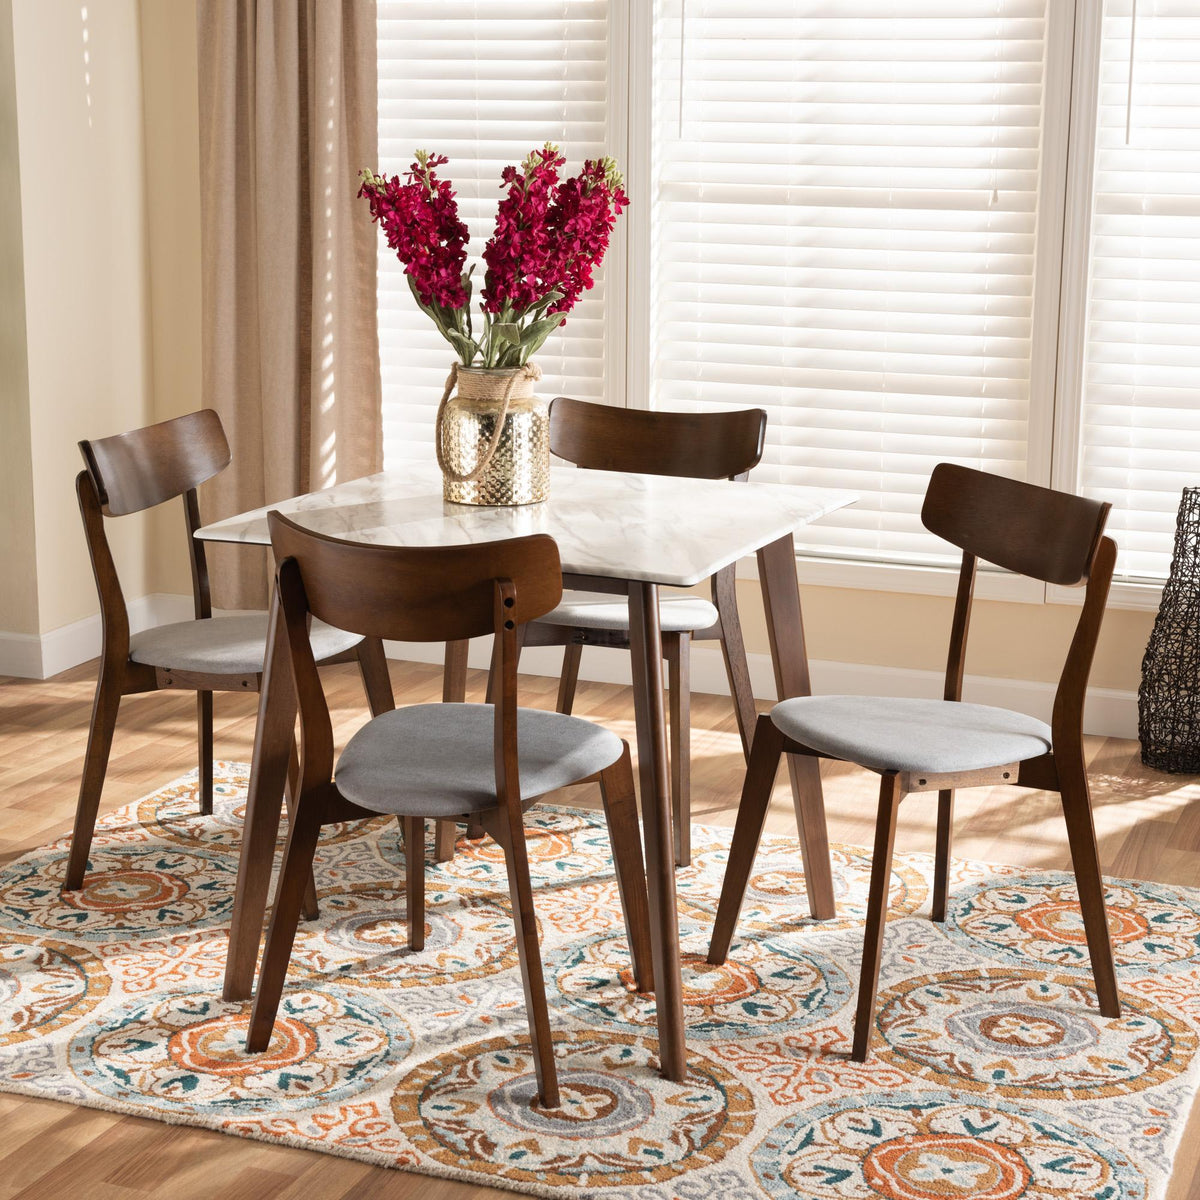 Baxton Studio Reba Mid-Century Modern Light Grey Fabric Upholstered And Walnut Brown Finished Wood 5-Piece Dining Set With Faux Marble Dining Table - Reba-Smoke/Walnut-5PC Dining Set